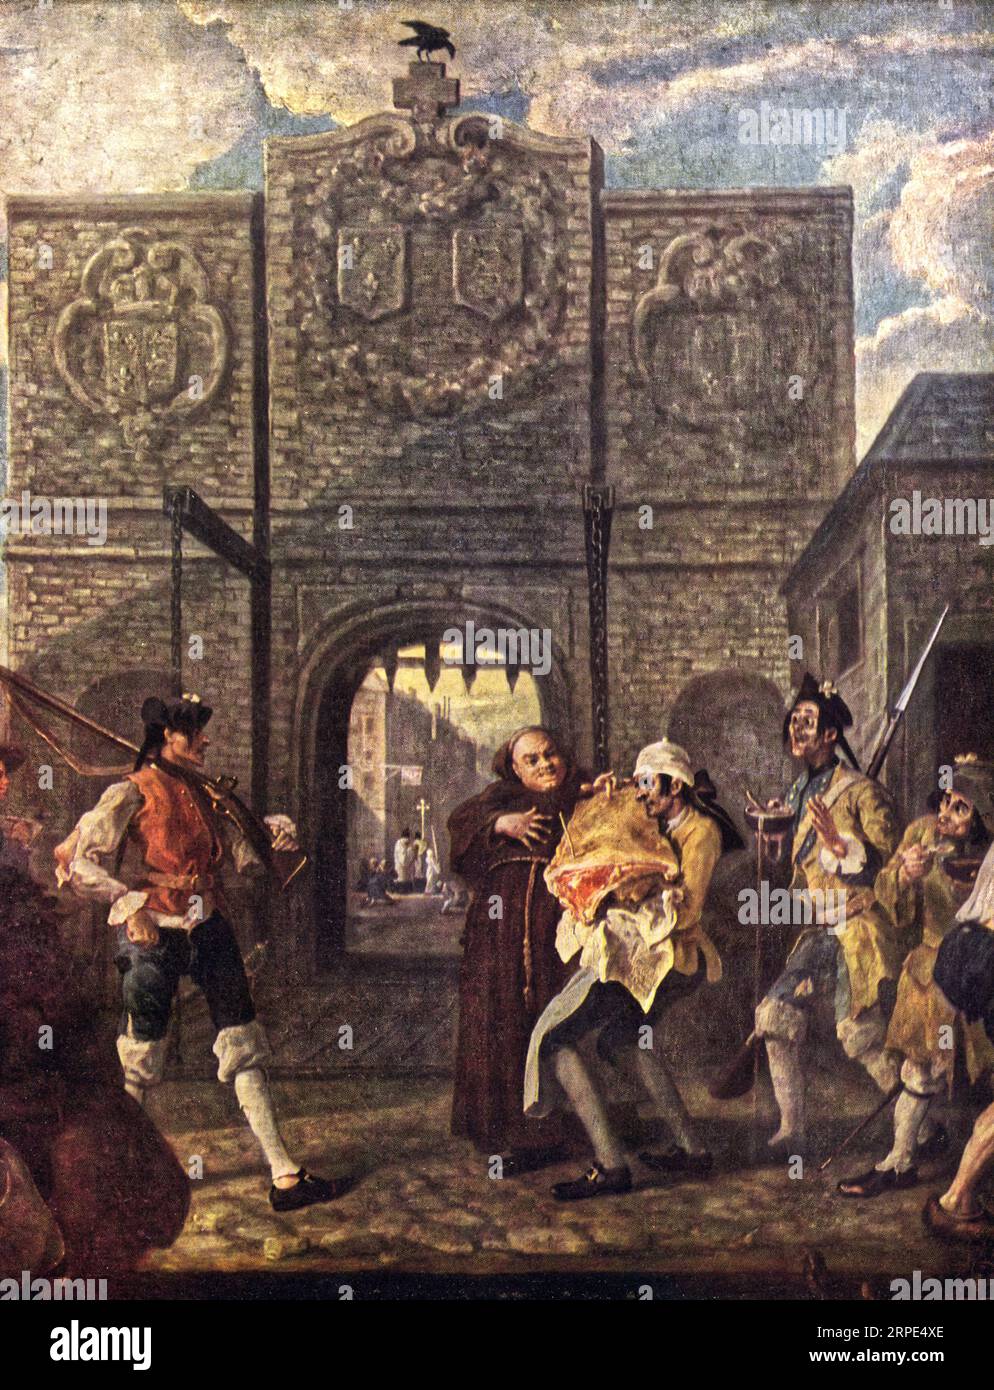 O the Roast Beef of Old England (‘The Gate of Calais’), 1748. By William Hogarth (1697-1764). Hogarth produced this painting upon his return from France, where he had been arrested as a spy while sketching in Calais. The scene depicts a side of beef being transported from the harbour to an English tavern in the port, while a group of undernourished, ragged French soldiers and a fat friar look on hungrily. Stock Photo